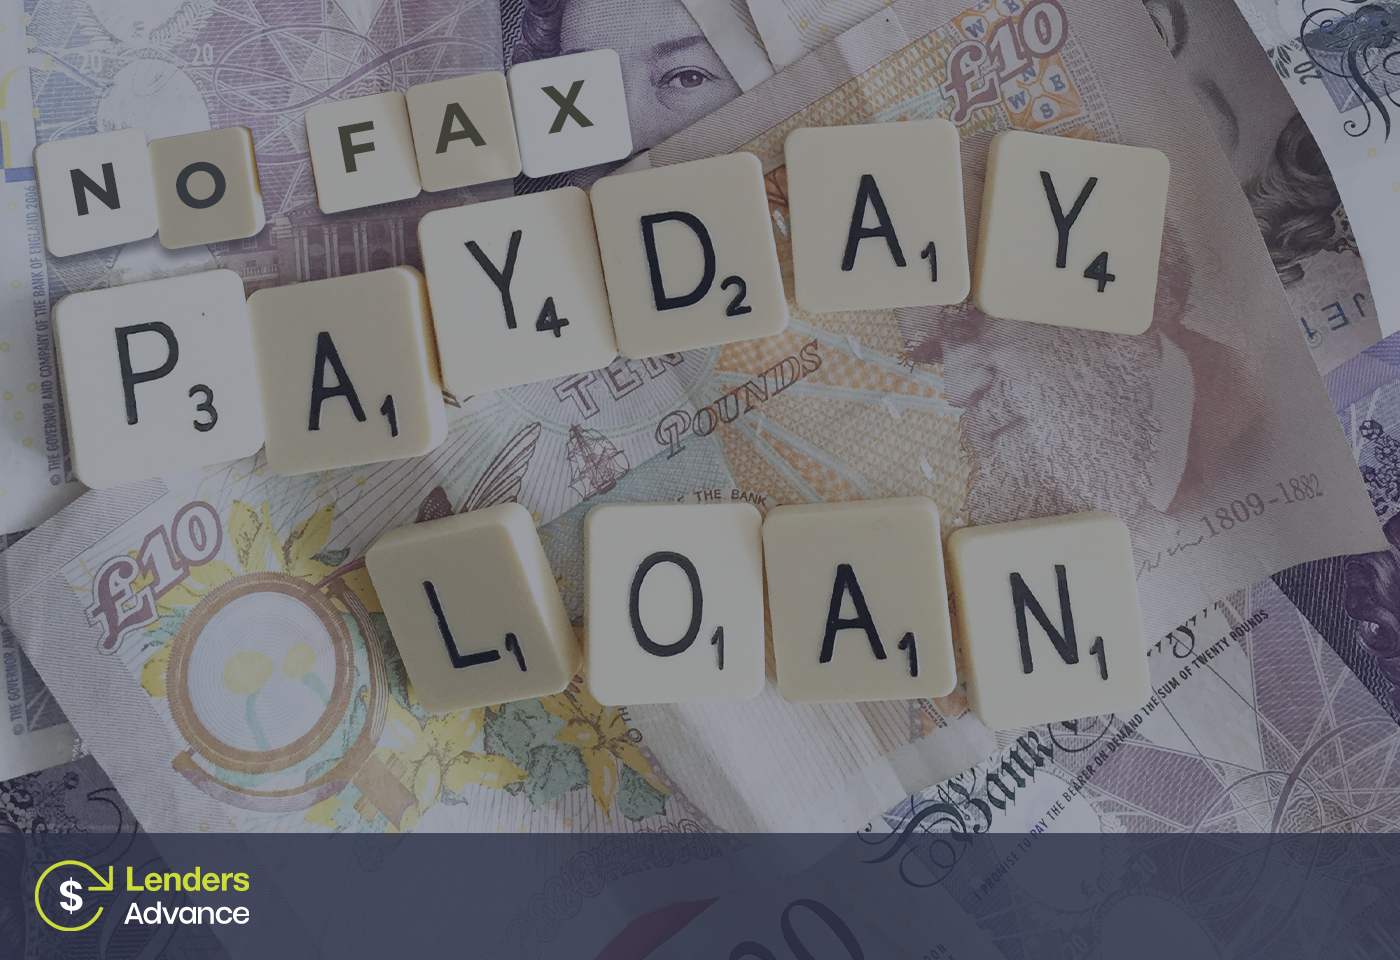 No fax payday loans Online 